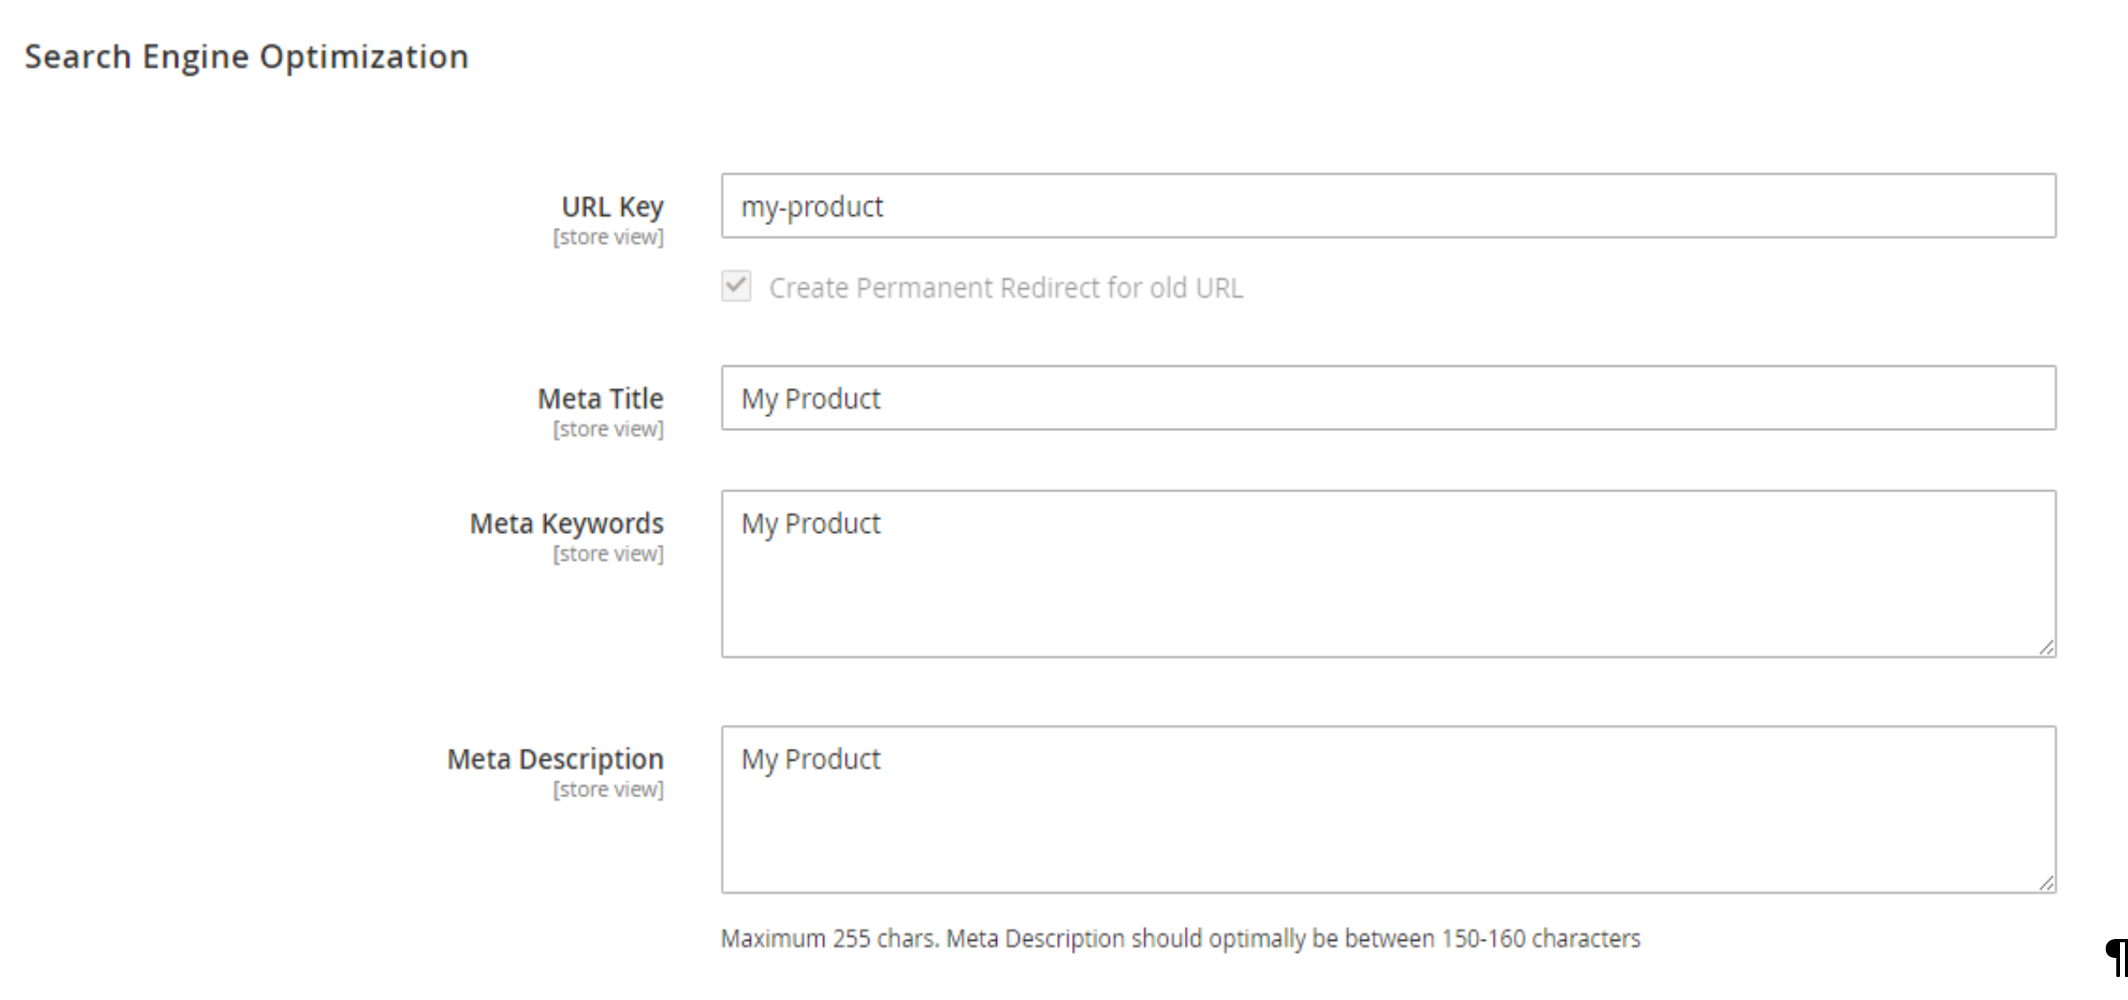 Magento 2 Search Engine Optimisation settings on product page